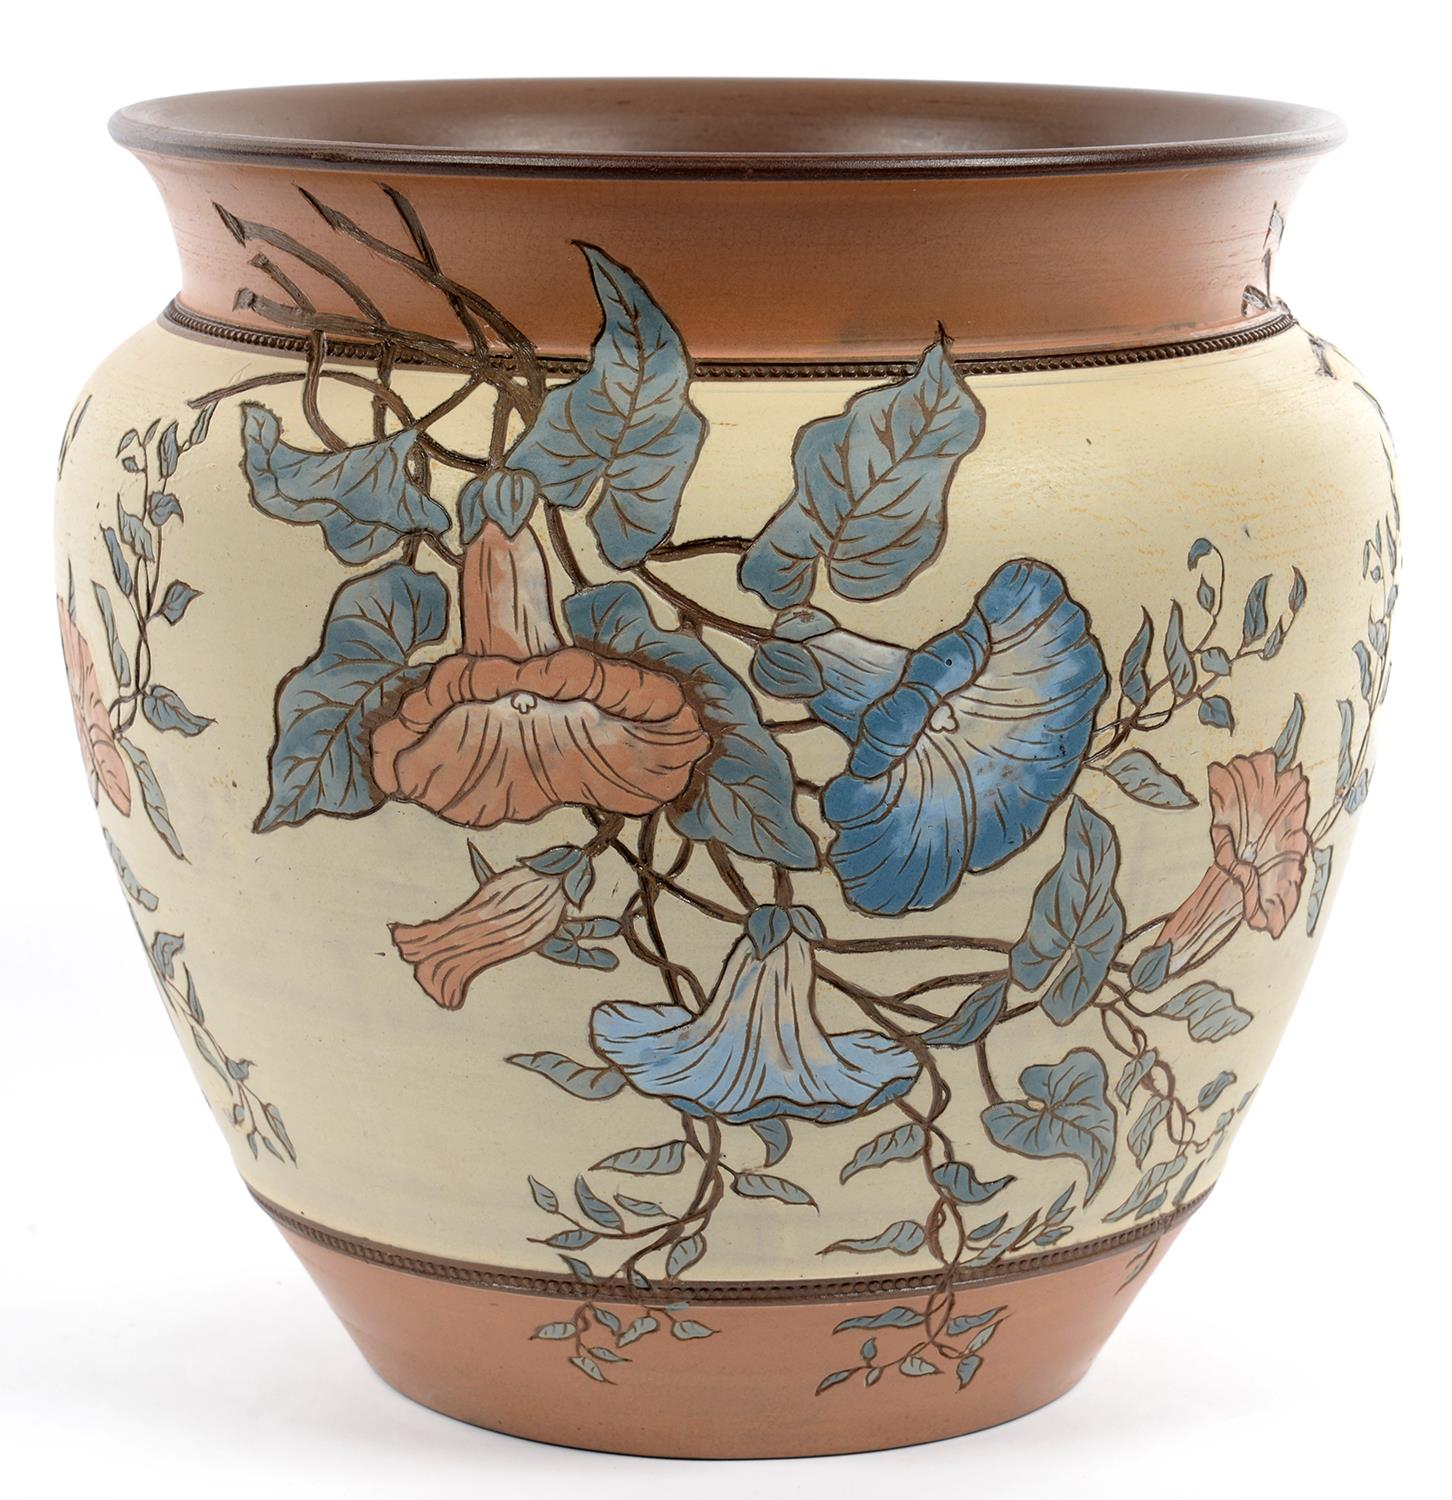 A CALVERT AND LOVATT ART POTTERY  JARDINIERE, DECORATED IN COLOURED SLIP AND SGRAFFITO BY MARY HELEN